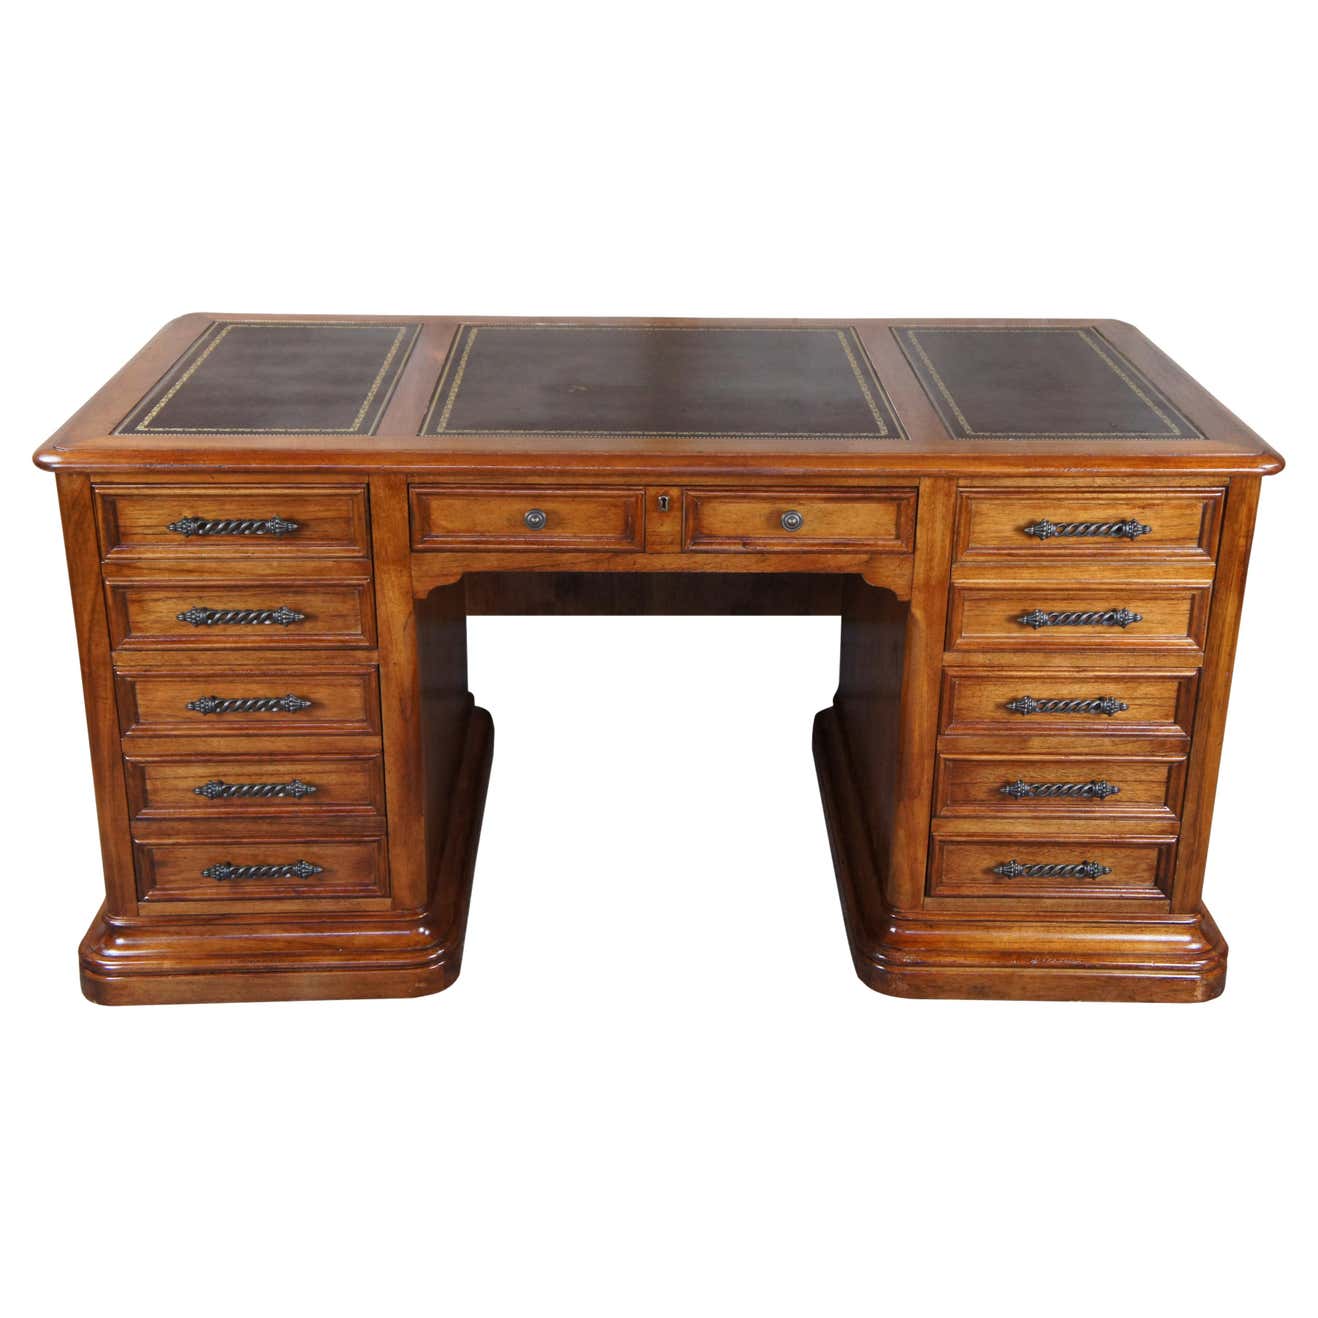 Traditional Vintage Hekman Oak Tooled Leather Top Executive Office Desk ...